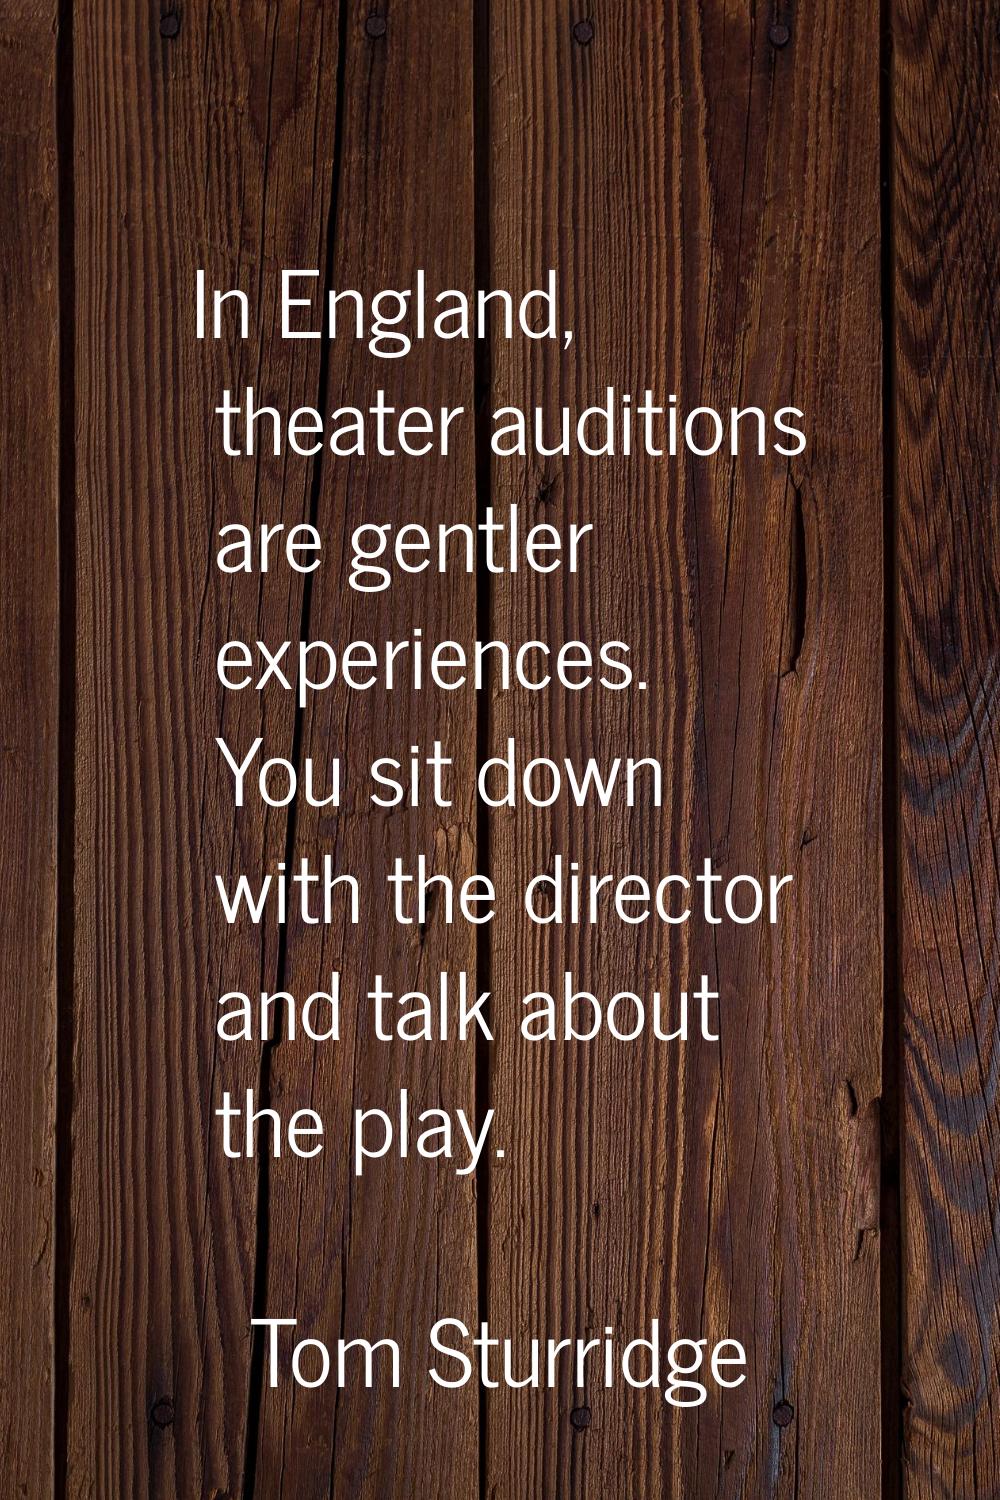 In England, theater auditions are gentler experiences. You sit down with the director and talk abou